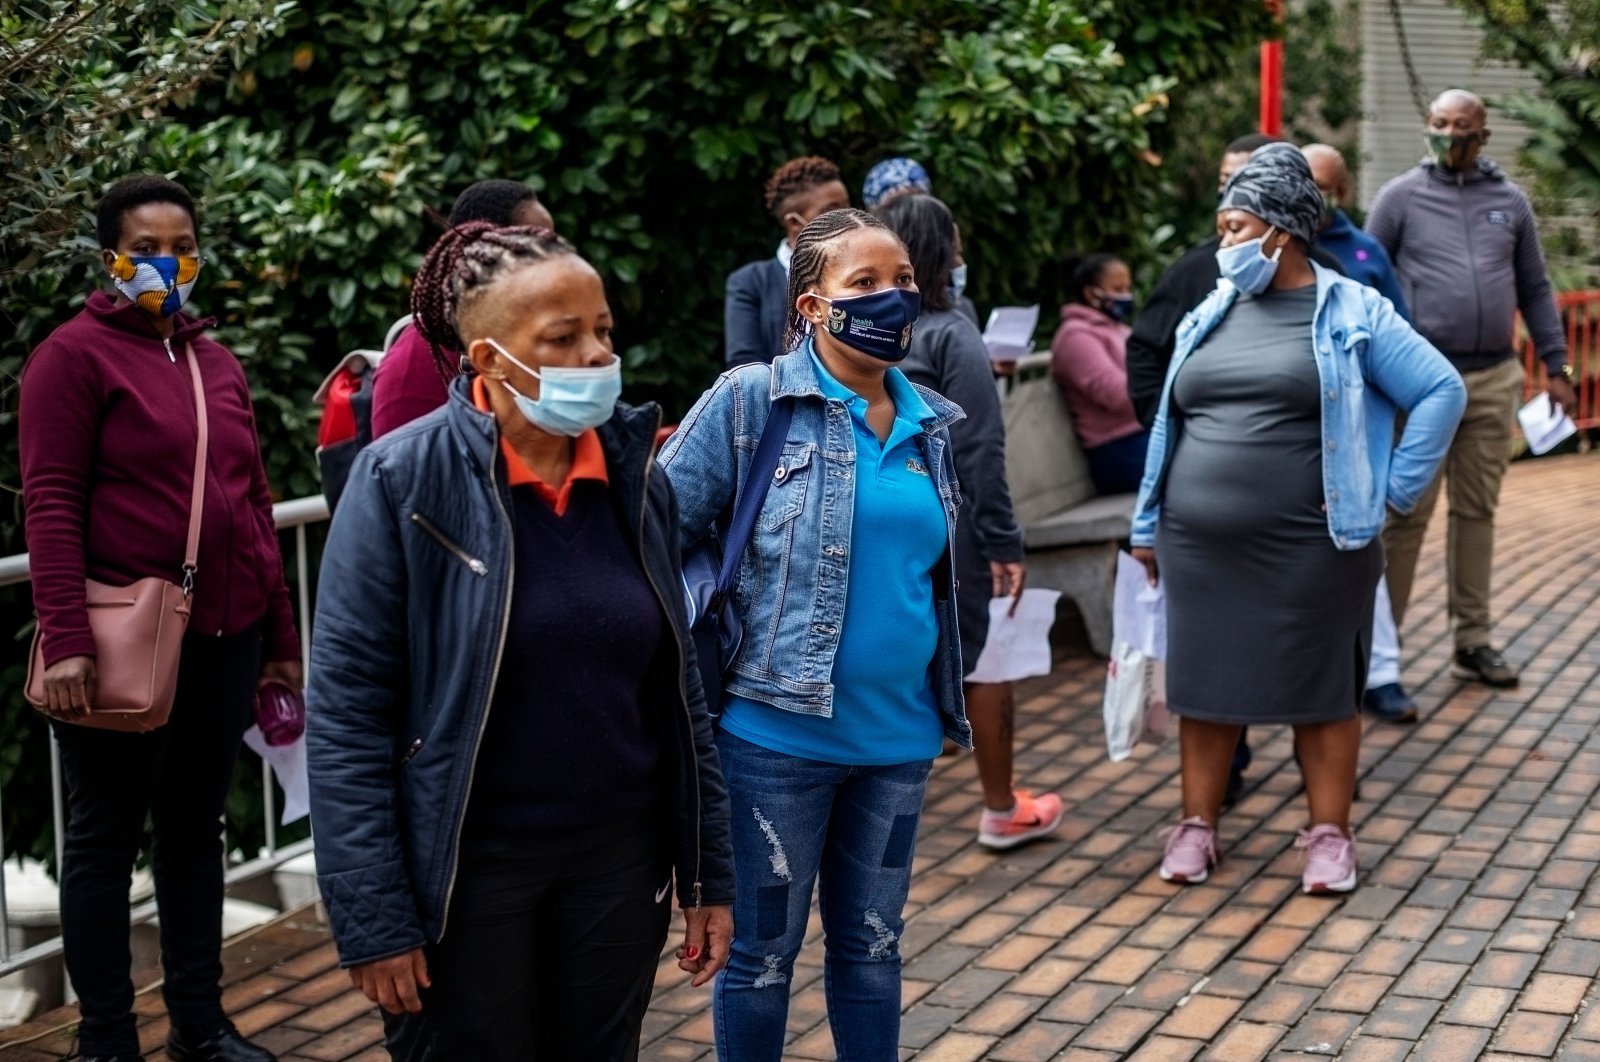 Demonstrators gather during a protest organized by the support staff at Helen Joseph Hospital to urge more testing for COVID-19 and a lack of personal protective equipment, Johannesburg, South Africa, May 25, 2020. (AFP Photo)